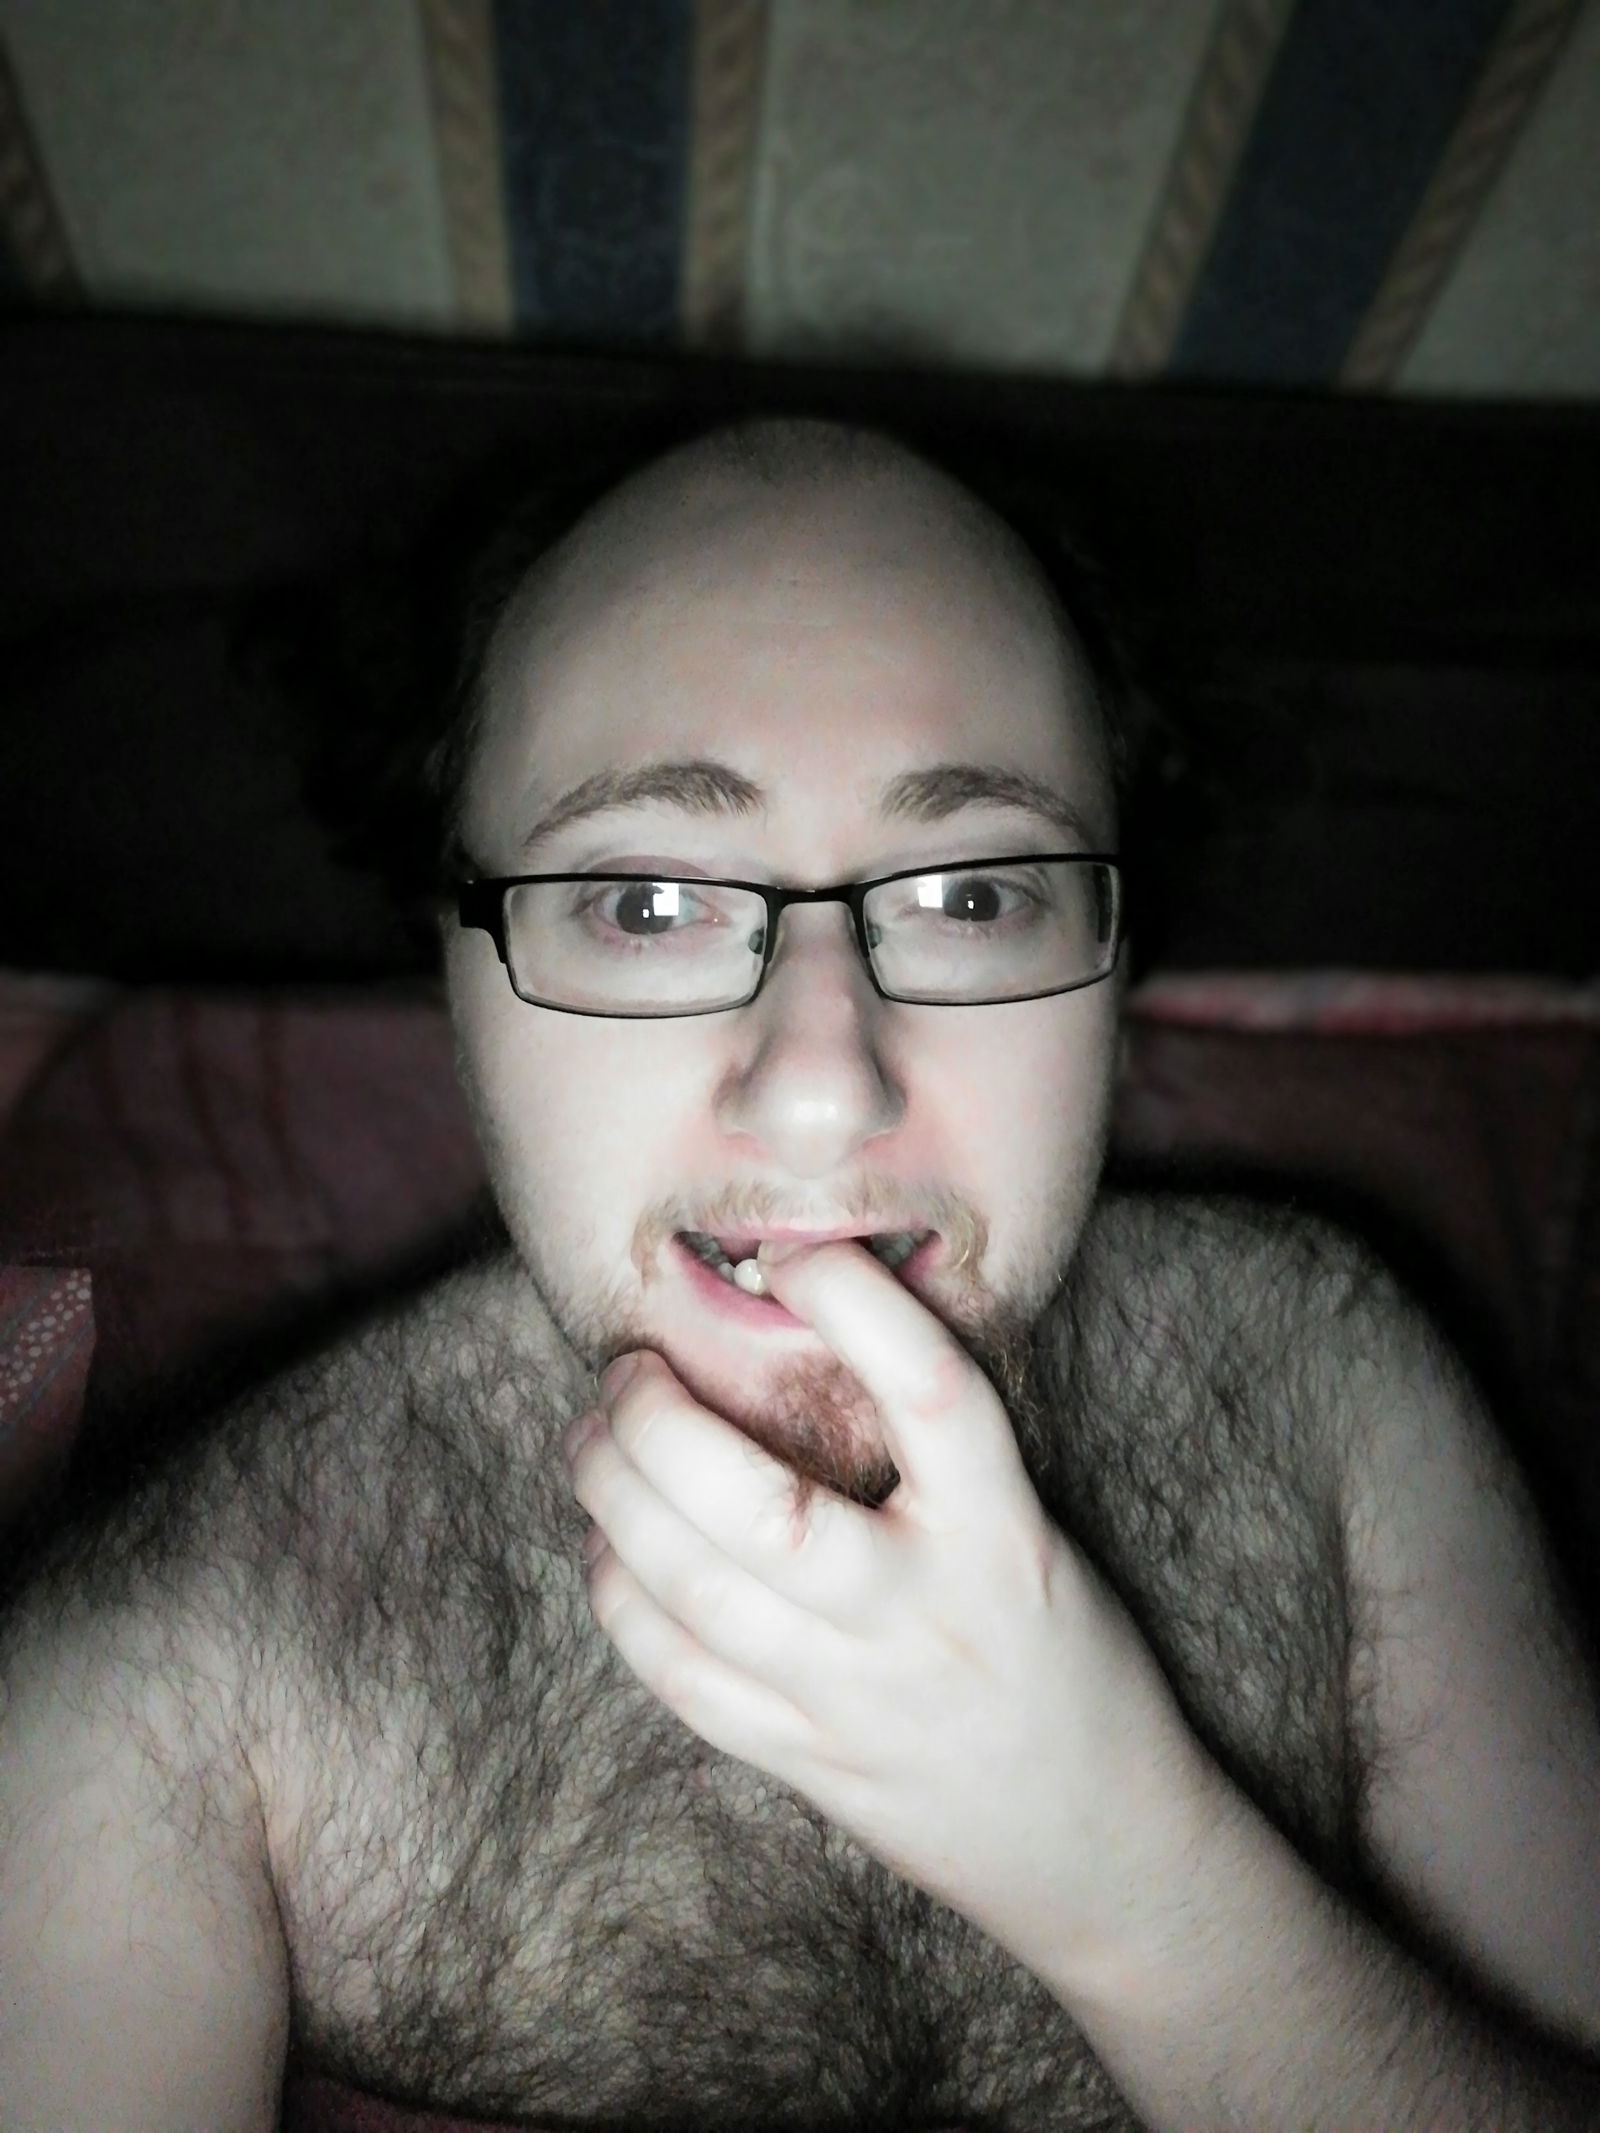 Photo by CatBoi with the username @CatBoi, who is a verified user,  January 29, 2019 at 4:36 PM and the text says '#portrait #seminude #amateur #hairy #selfie #bed'